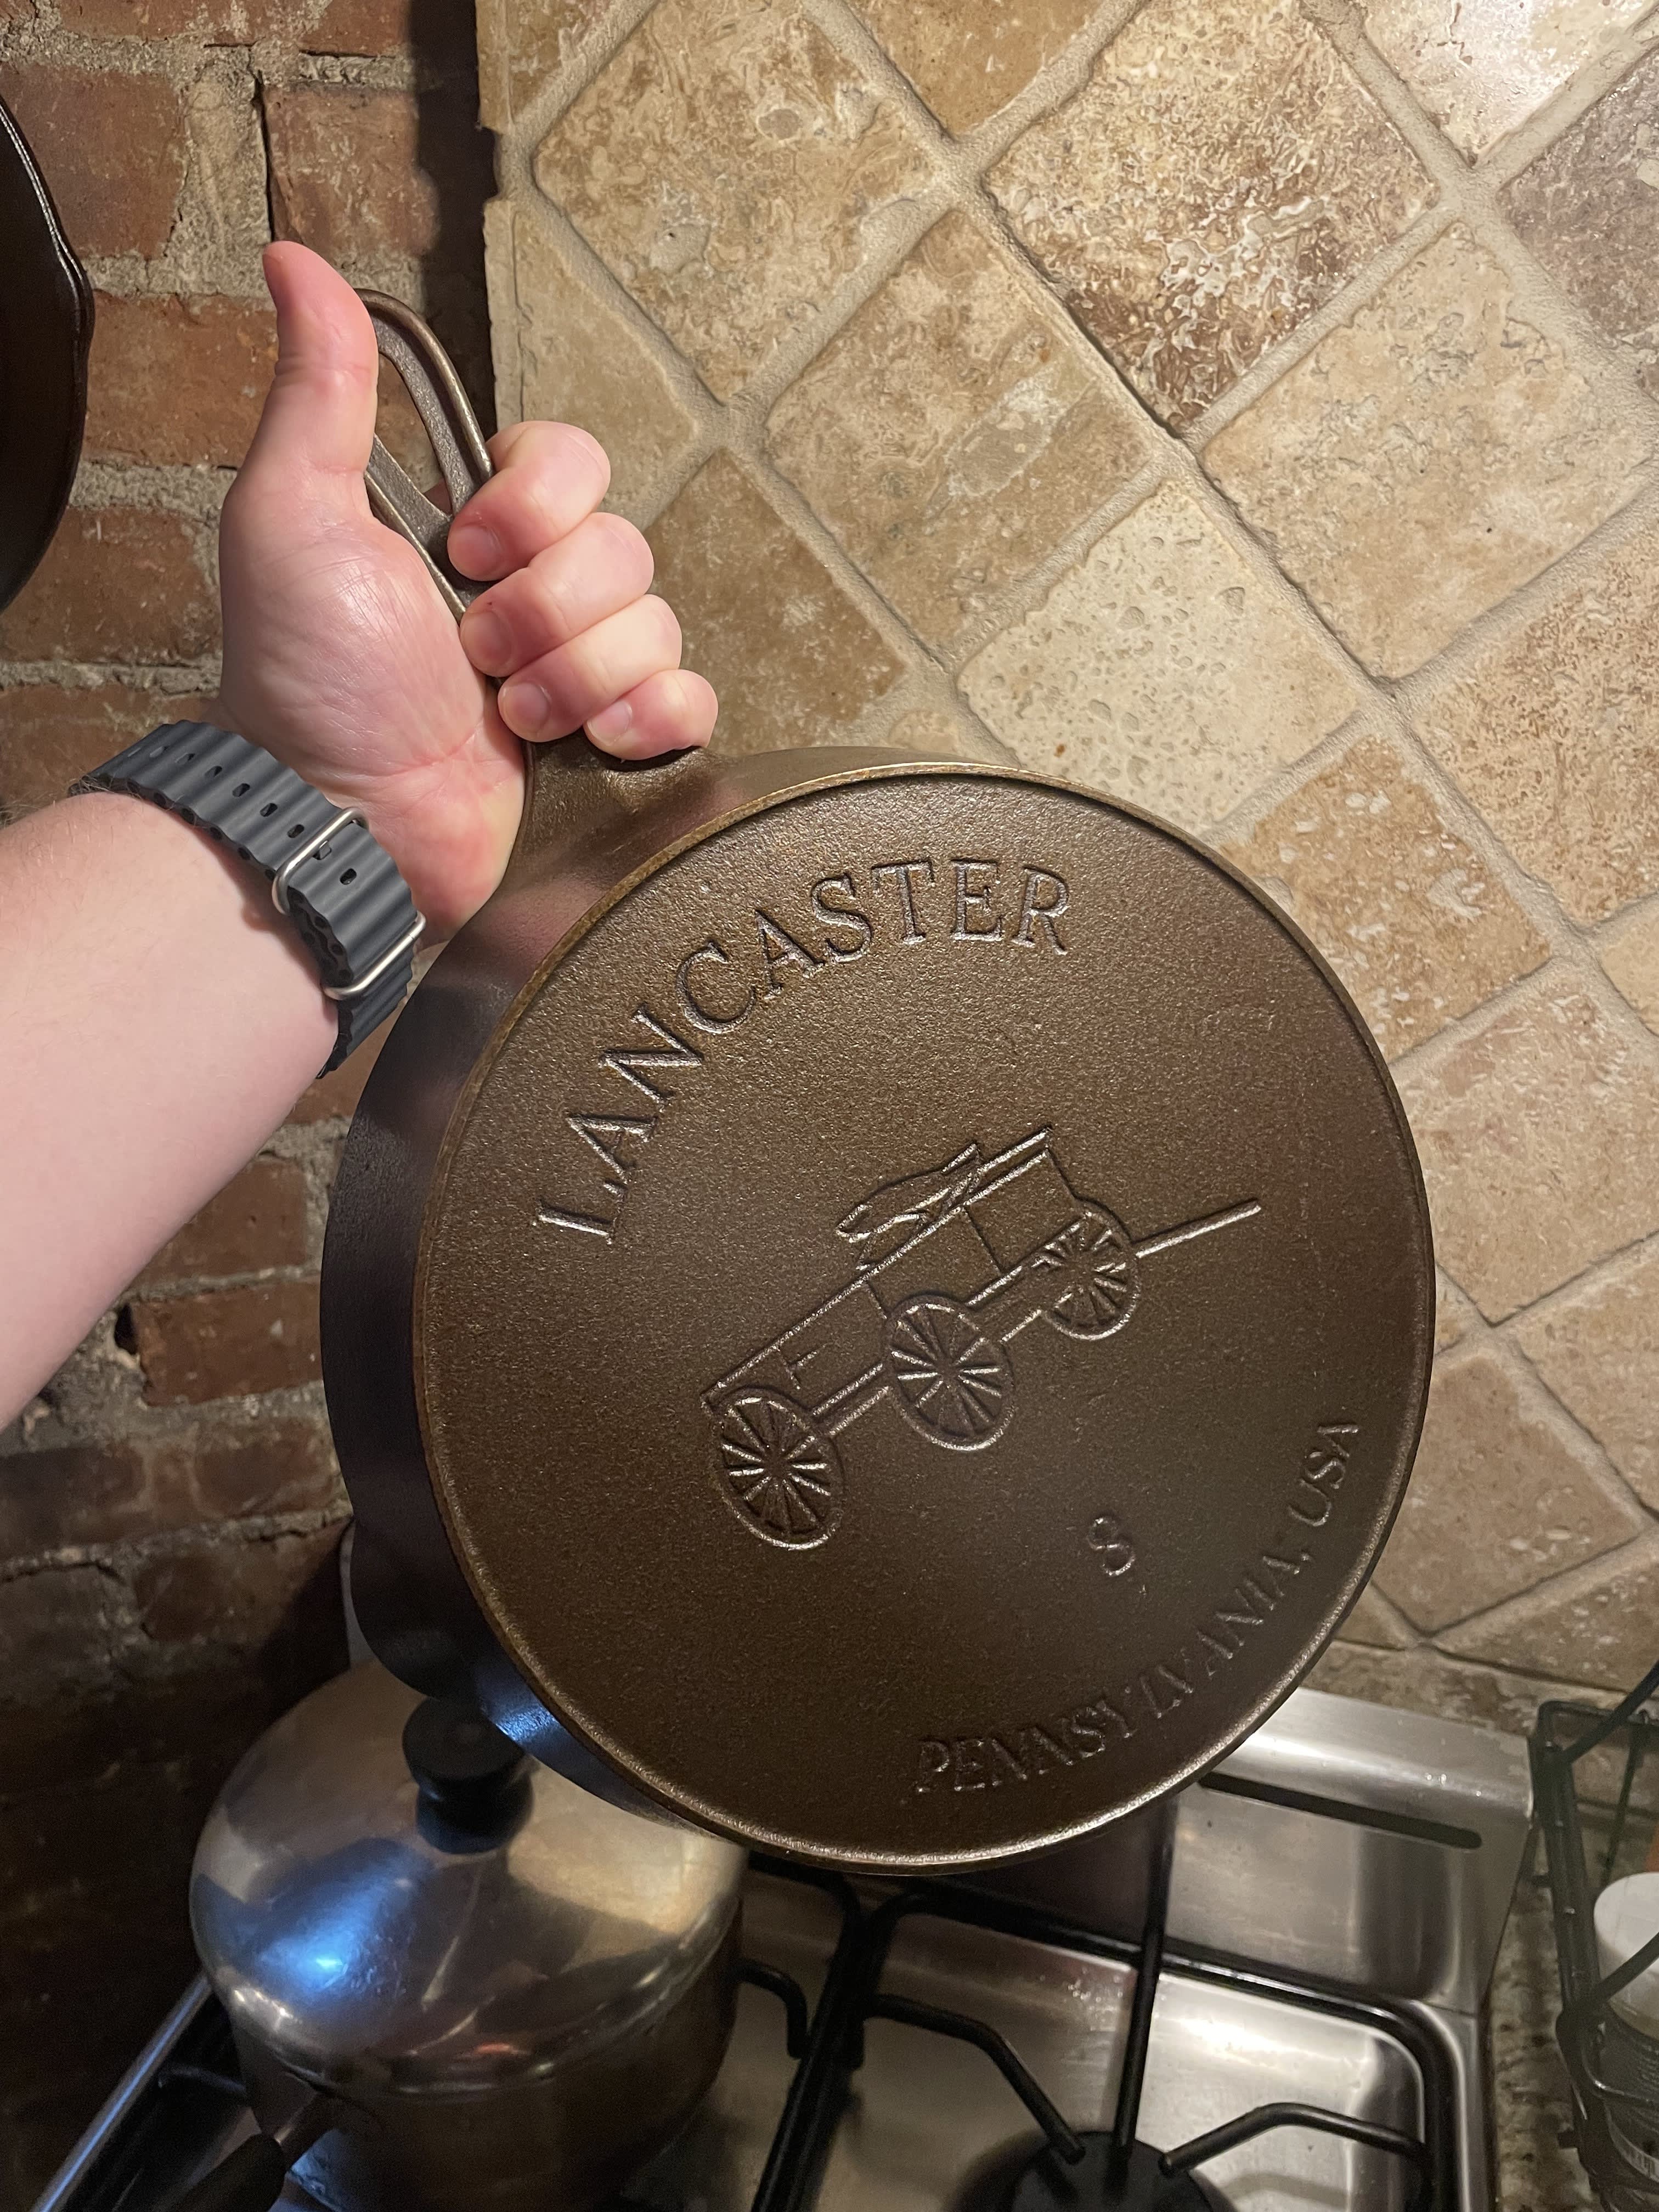 Why I Love the Lancaster No. 8 Cast Iron Skillet: Tried & Tested